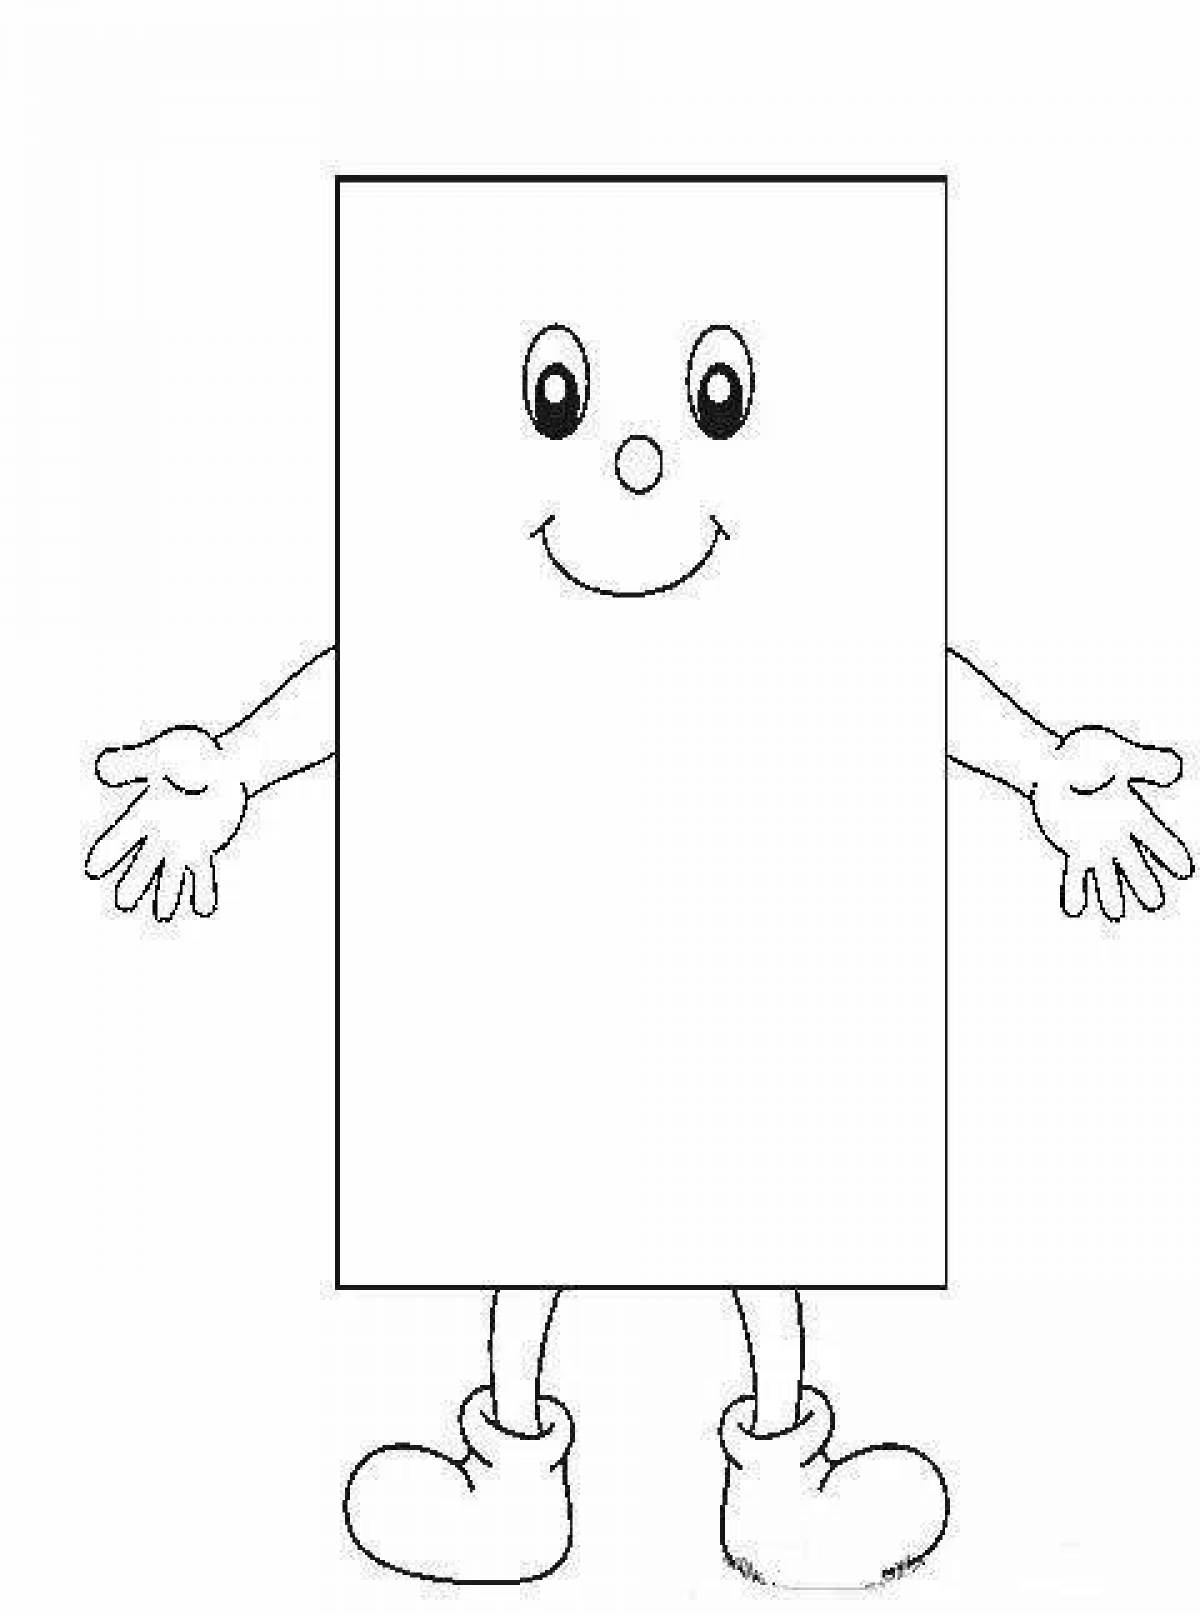 Coloring page with a striking rectangle